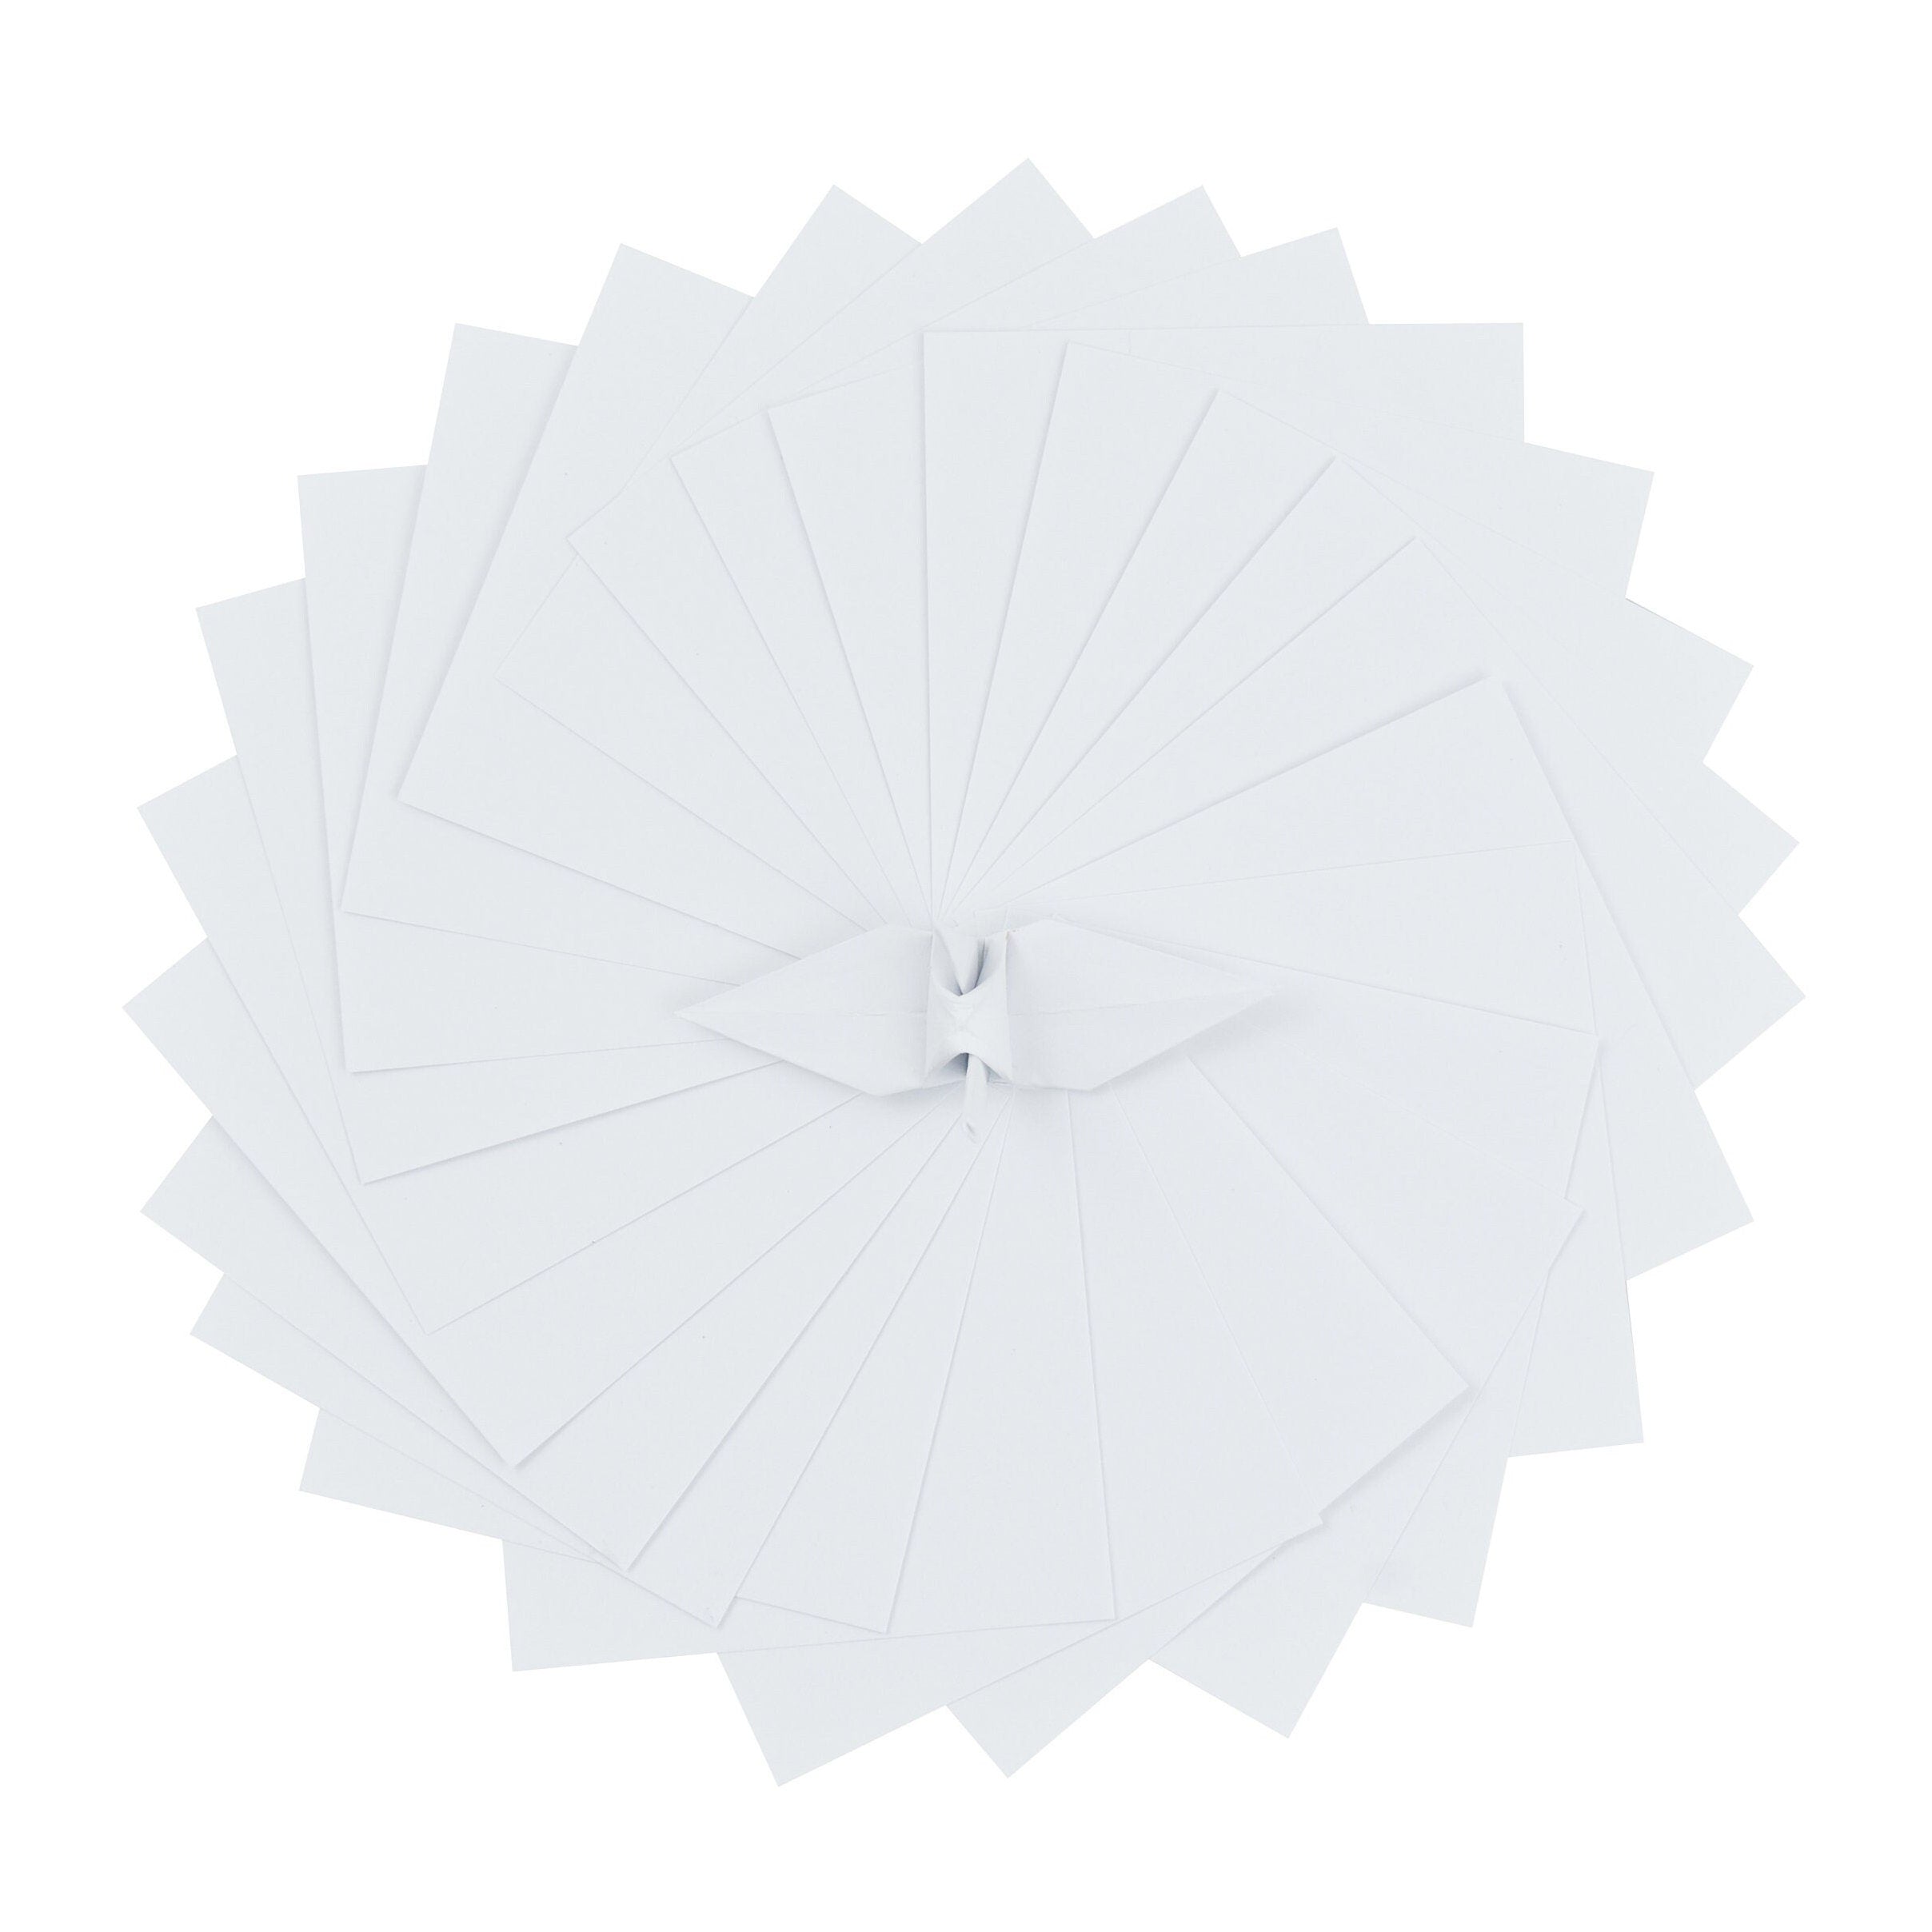 100 White Origami Paper Sheets 3x3 inches Square Paper Pack for Folding, Origami Cranes, and Decoration